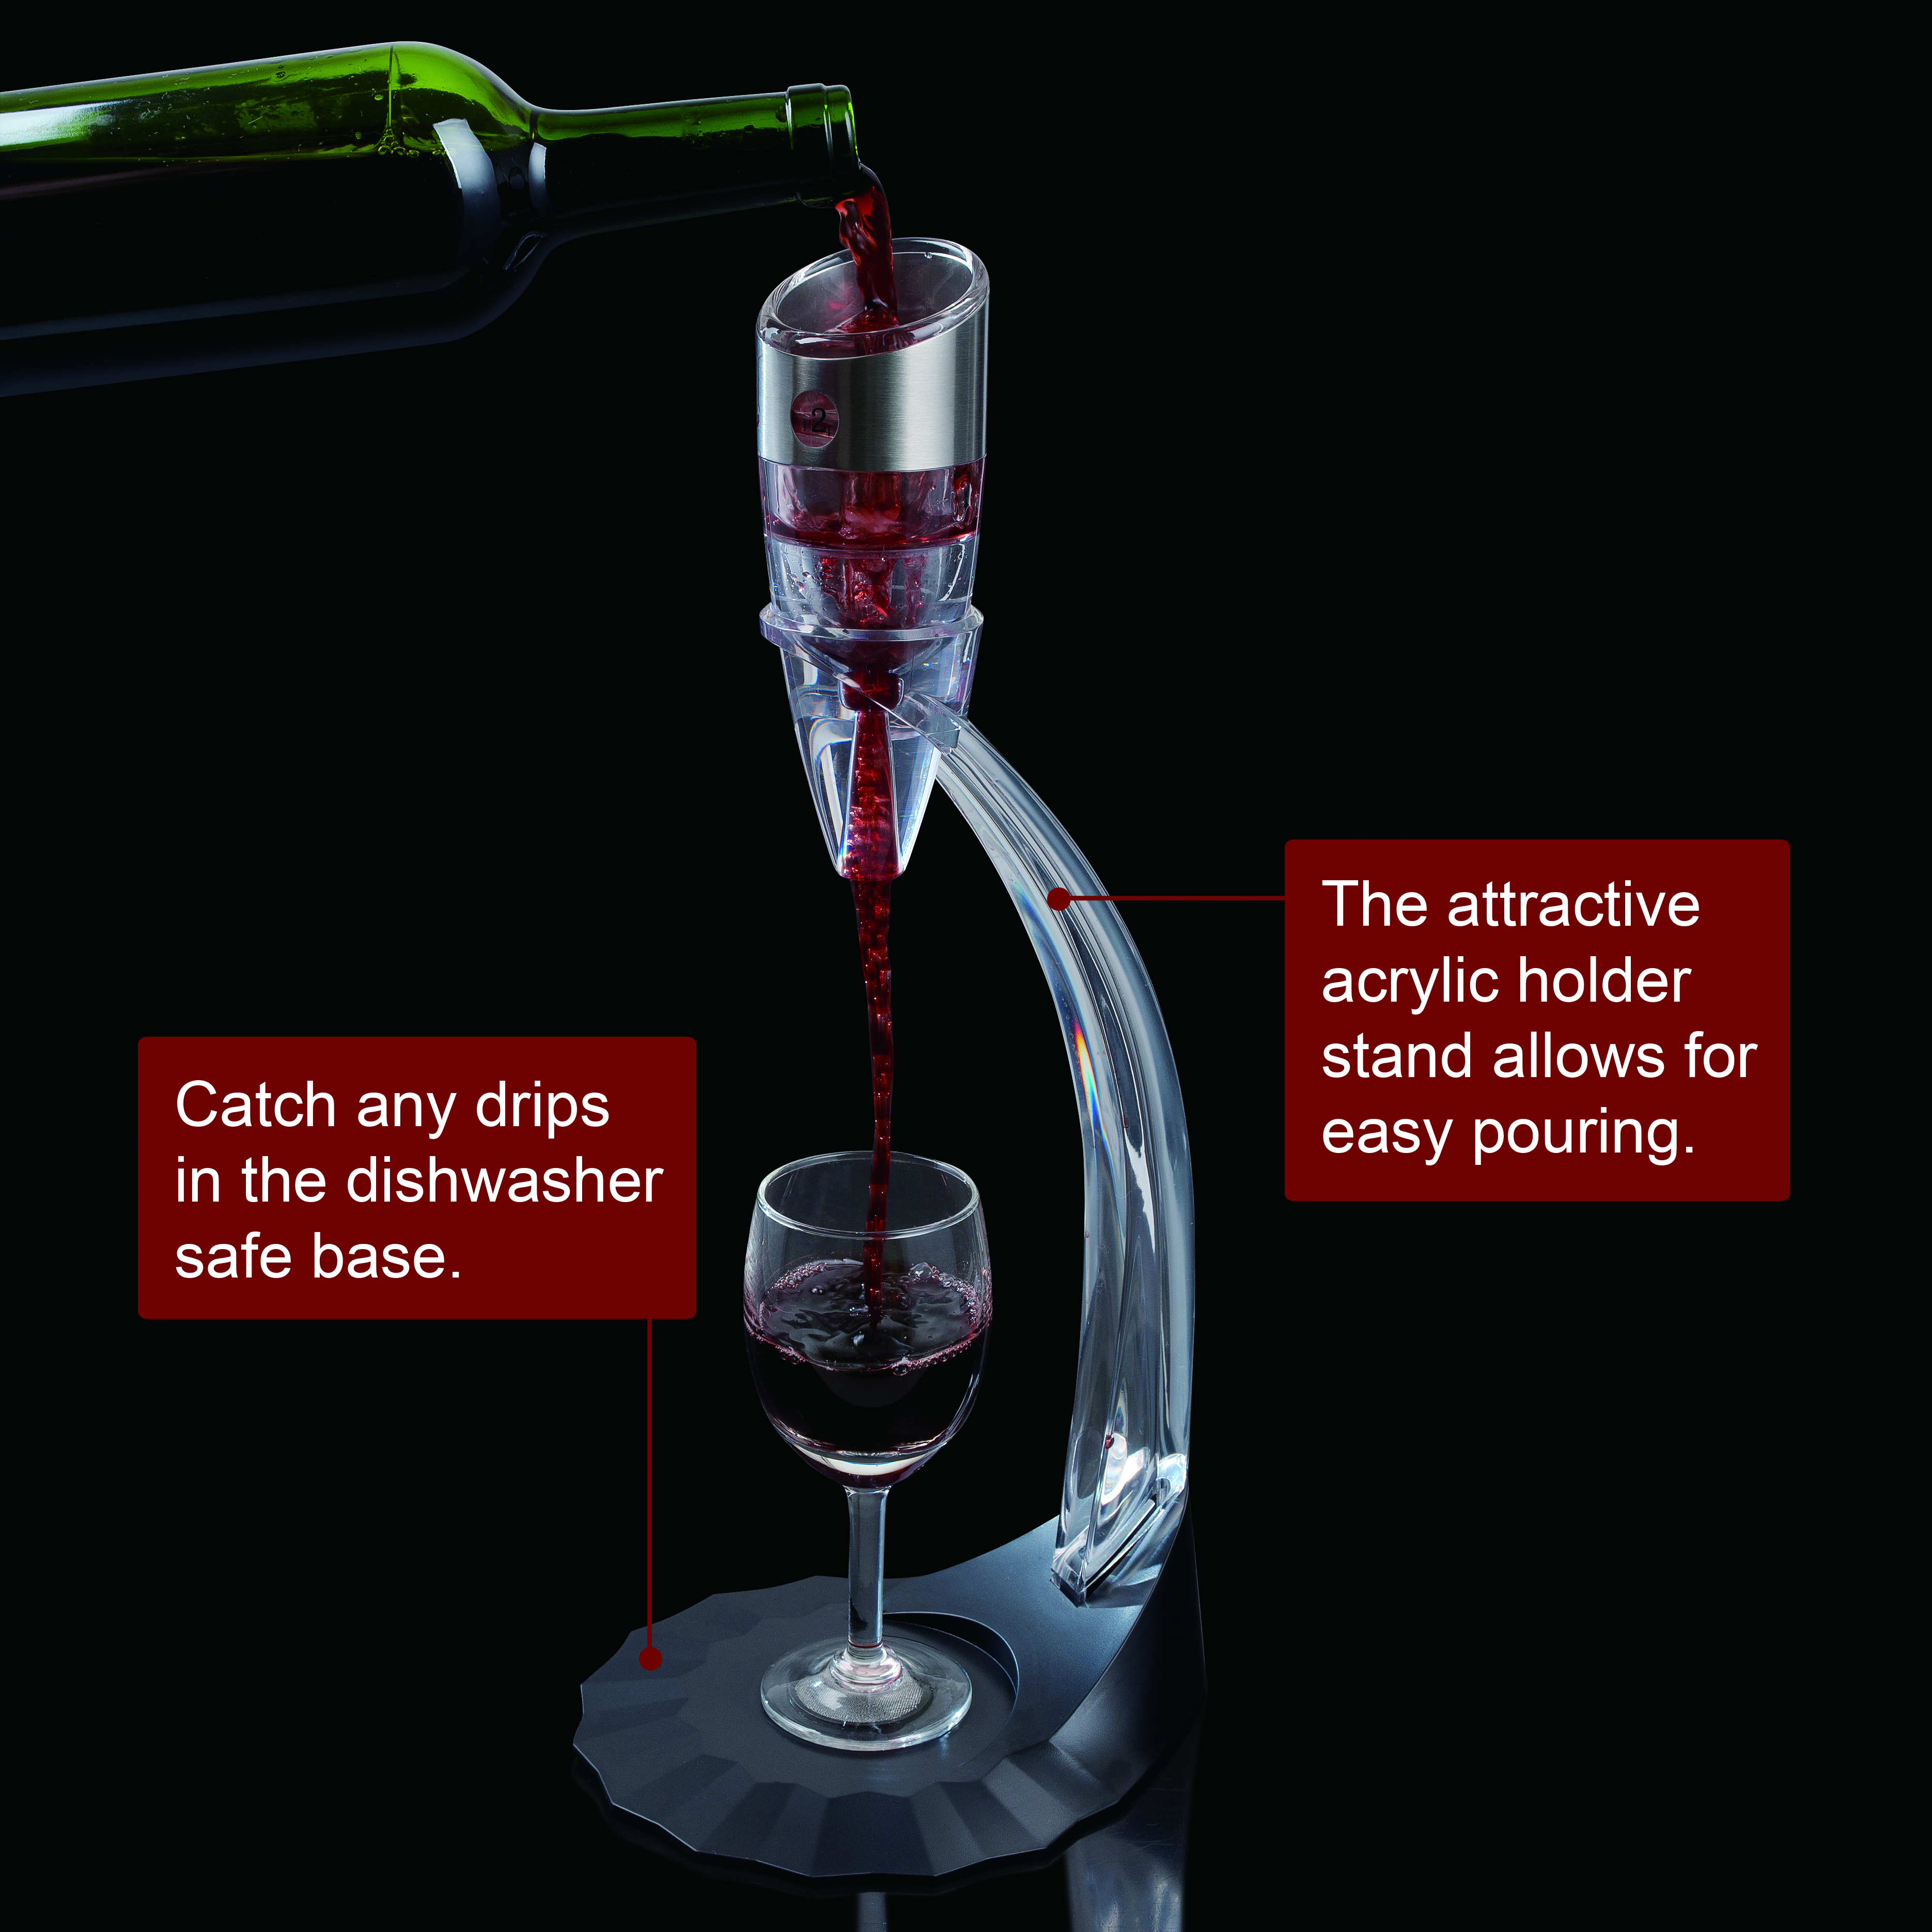 Secura Deluxe Wine Aerator Aerating Pourer Spout And Decanter With 6 Speeds Of Aeration The Secura